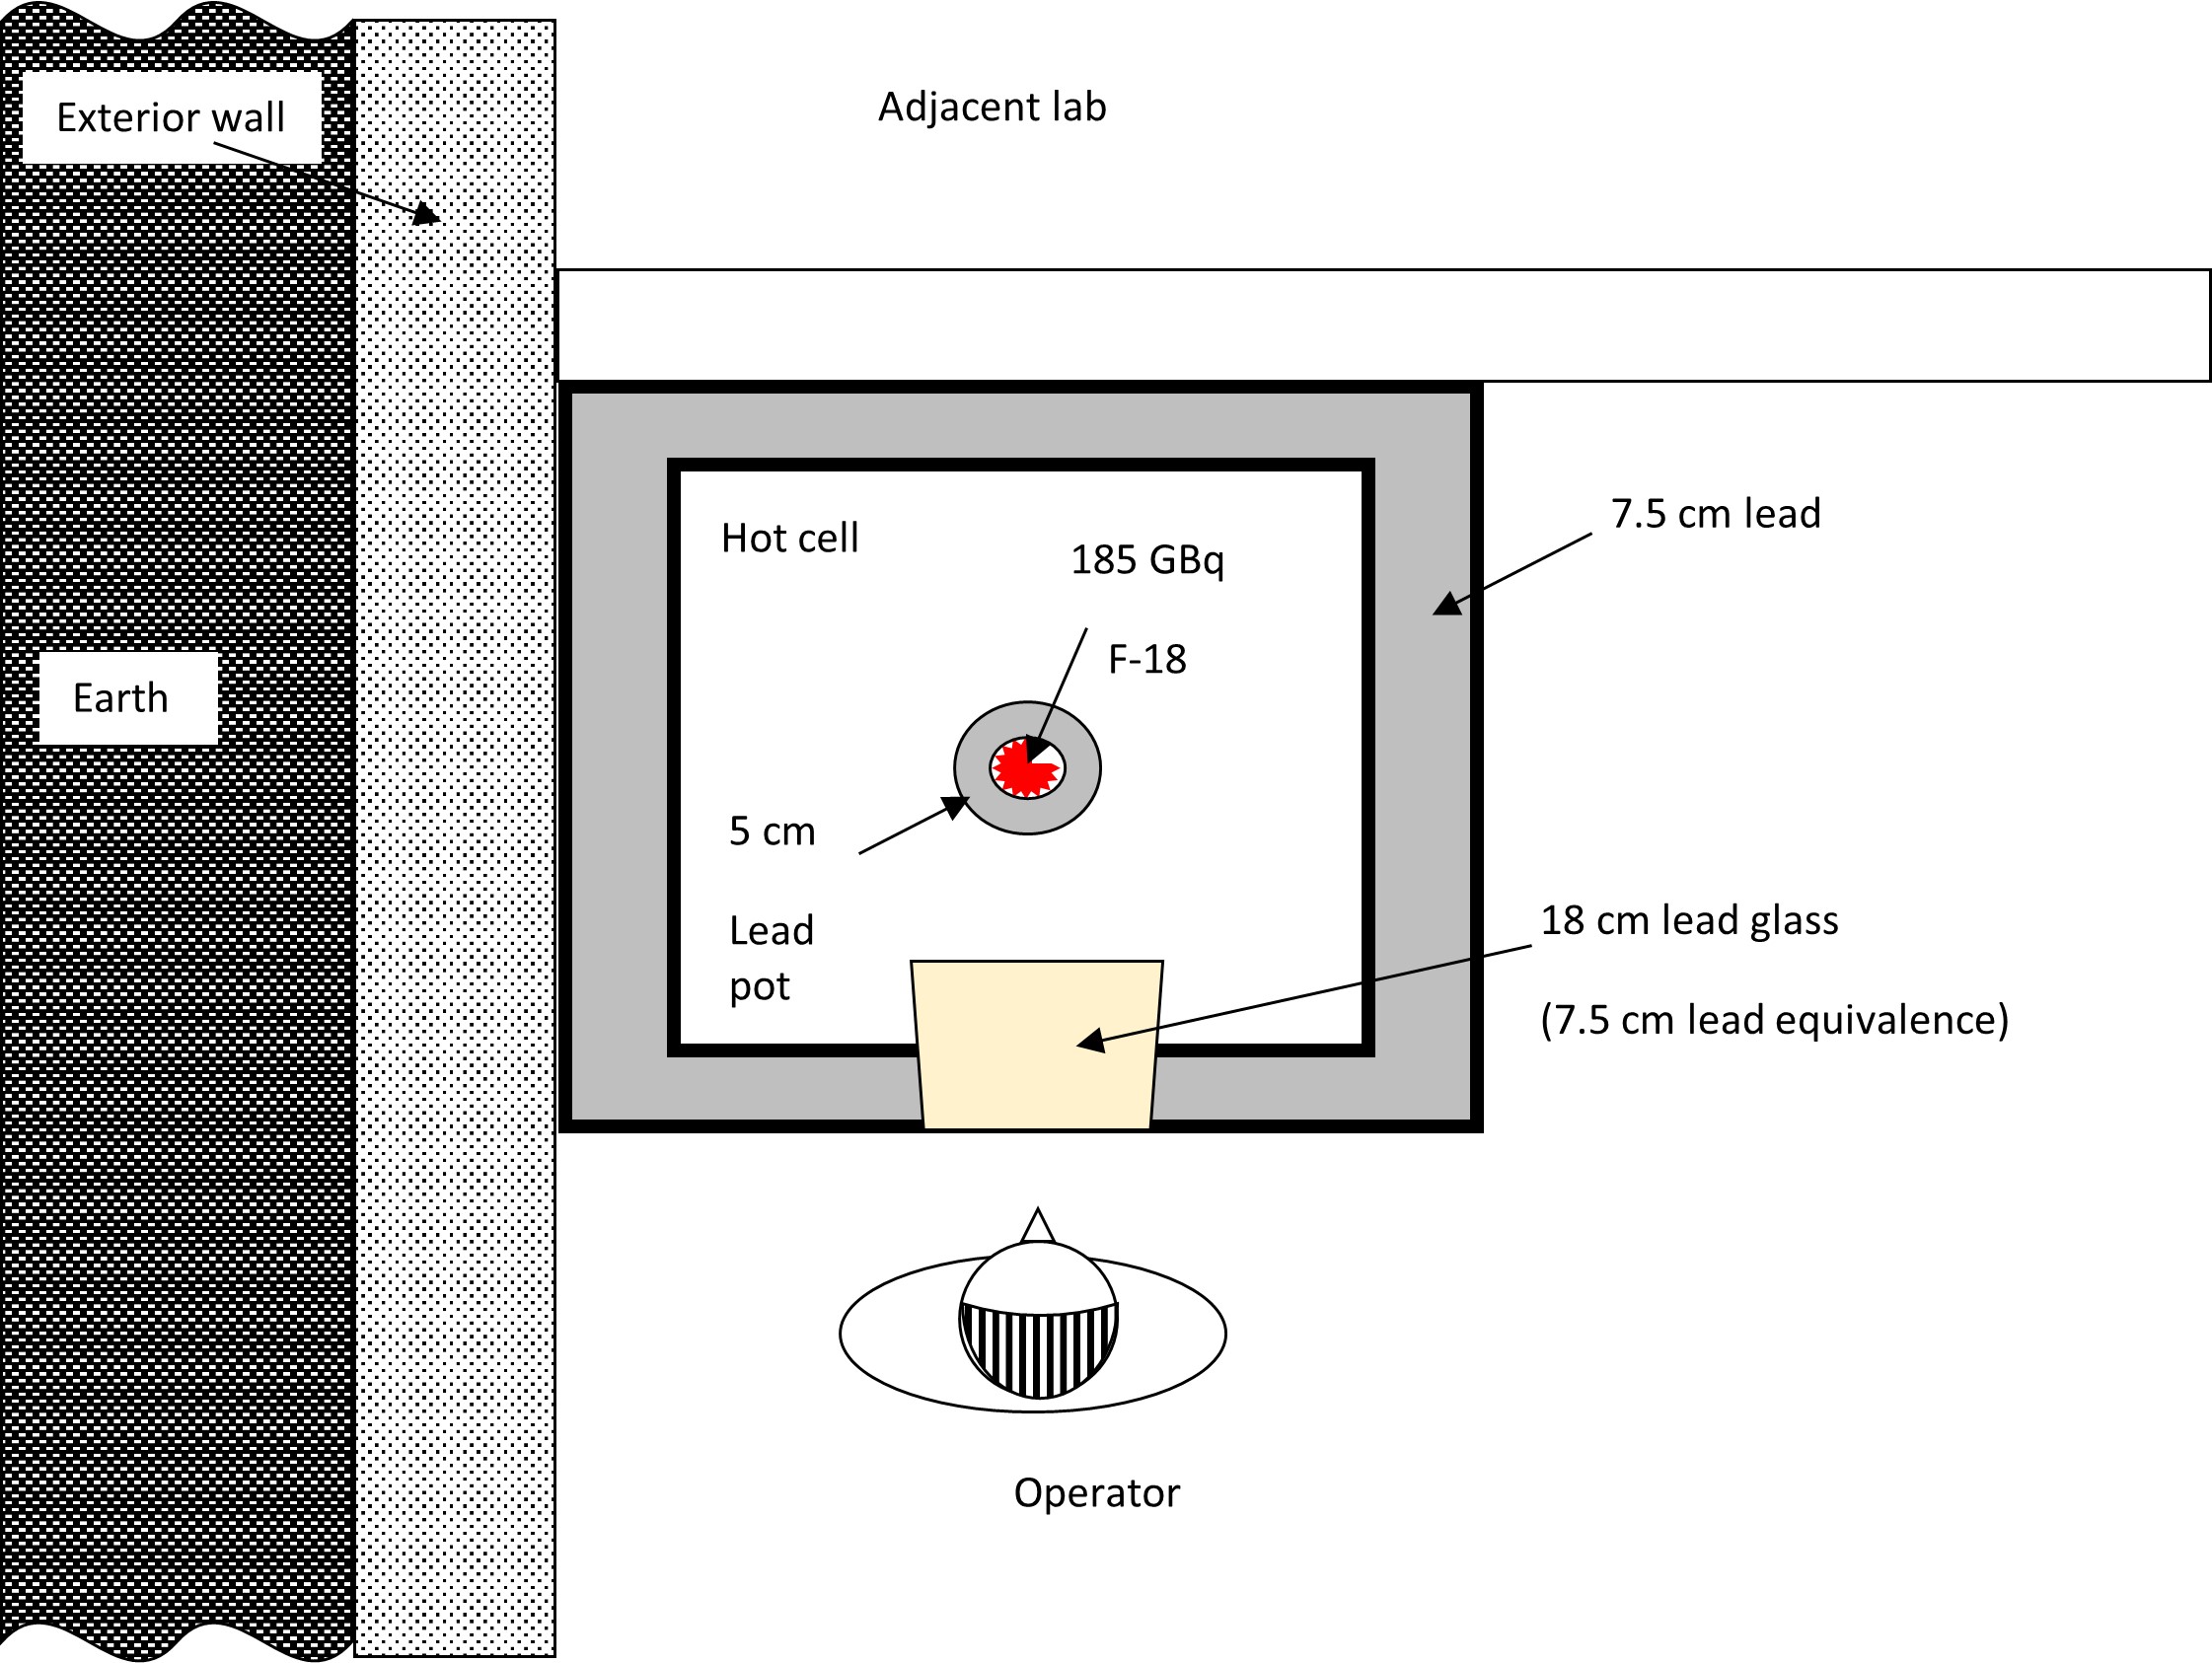 he diagram is a 2-D view from above the hot cell, which displays the hot cell perimeter, location of the lead glass within the hot cell, and location where the nuclear substances that are to be used inside the hot cell.  Other information includes the location of the operator facing the hot cell and adjoining exterior wall.